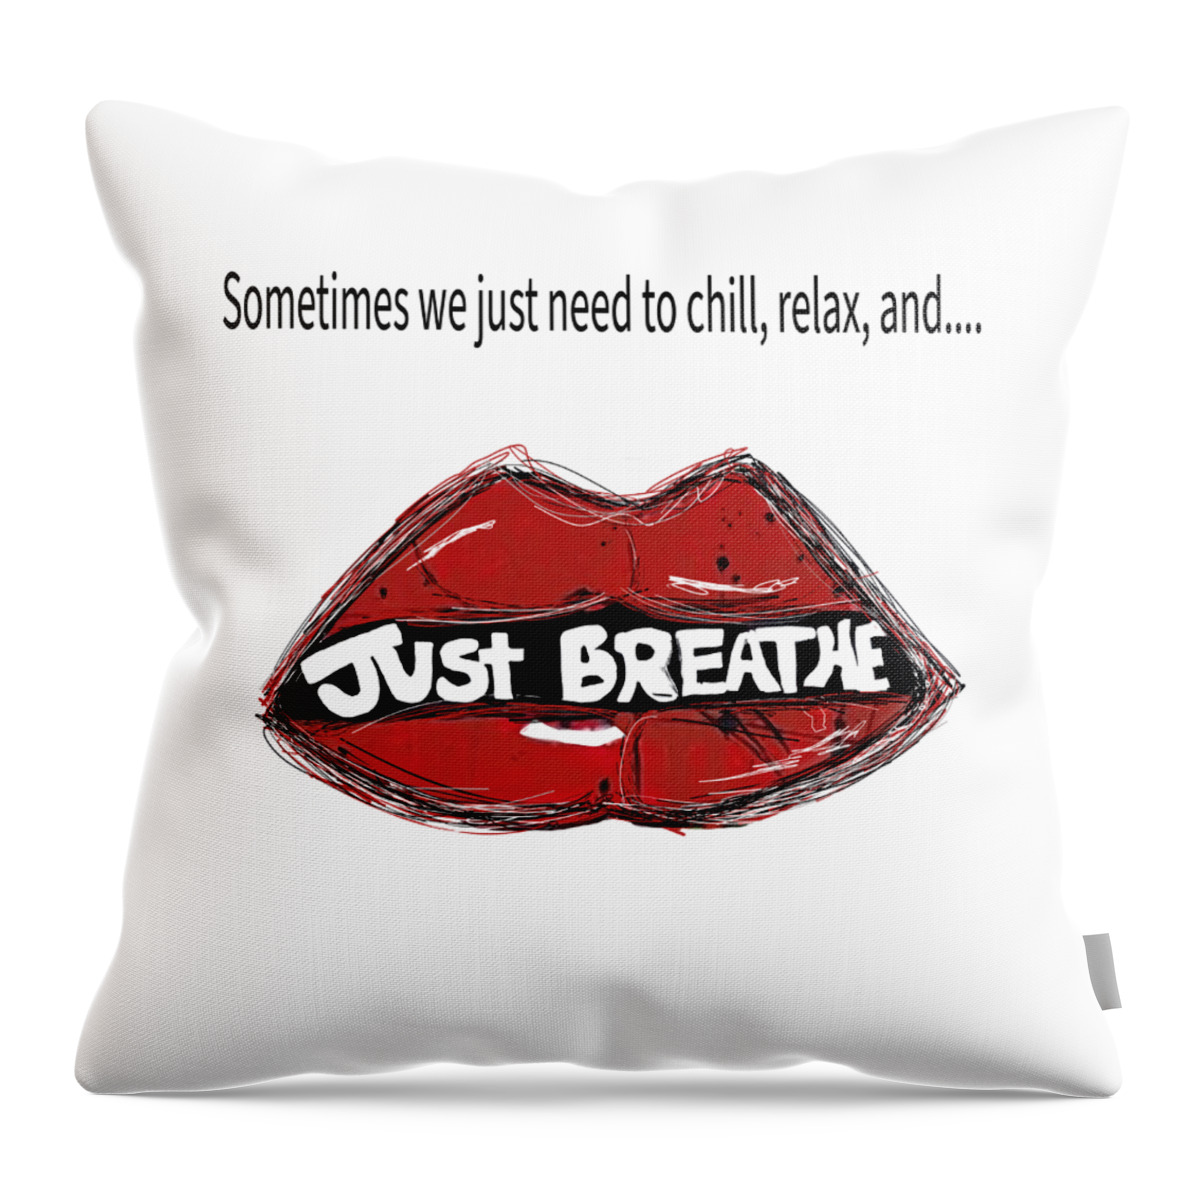 Just Breathe Throw Pillow featuring the digital art Chill just breathe by Amber Lasche